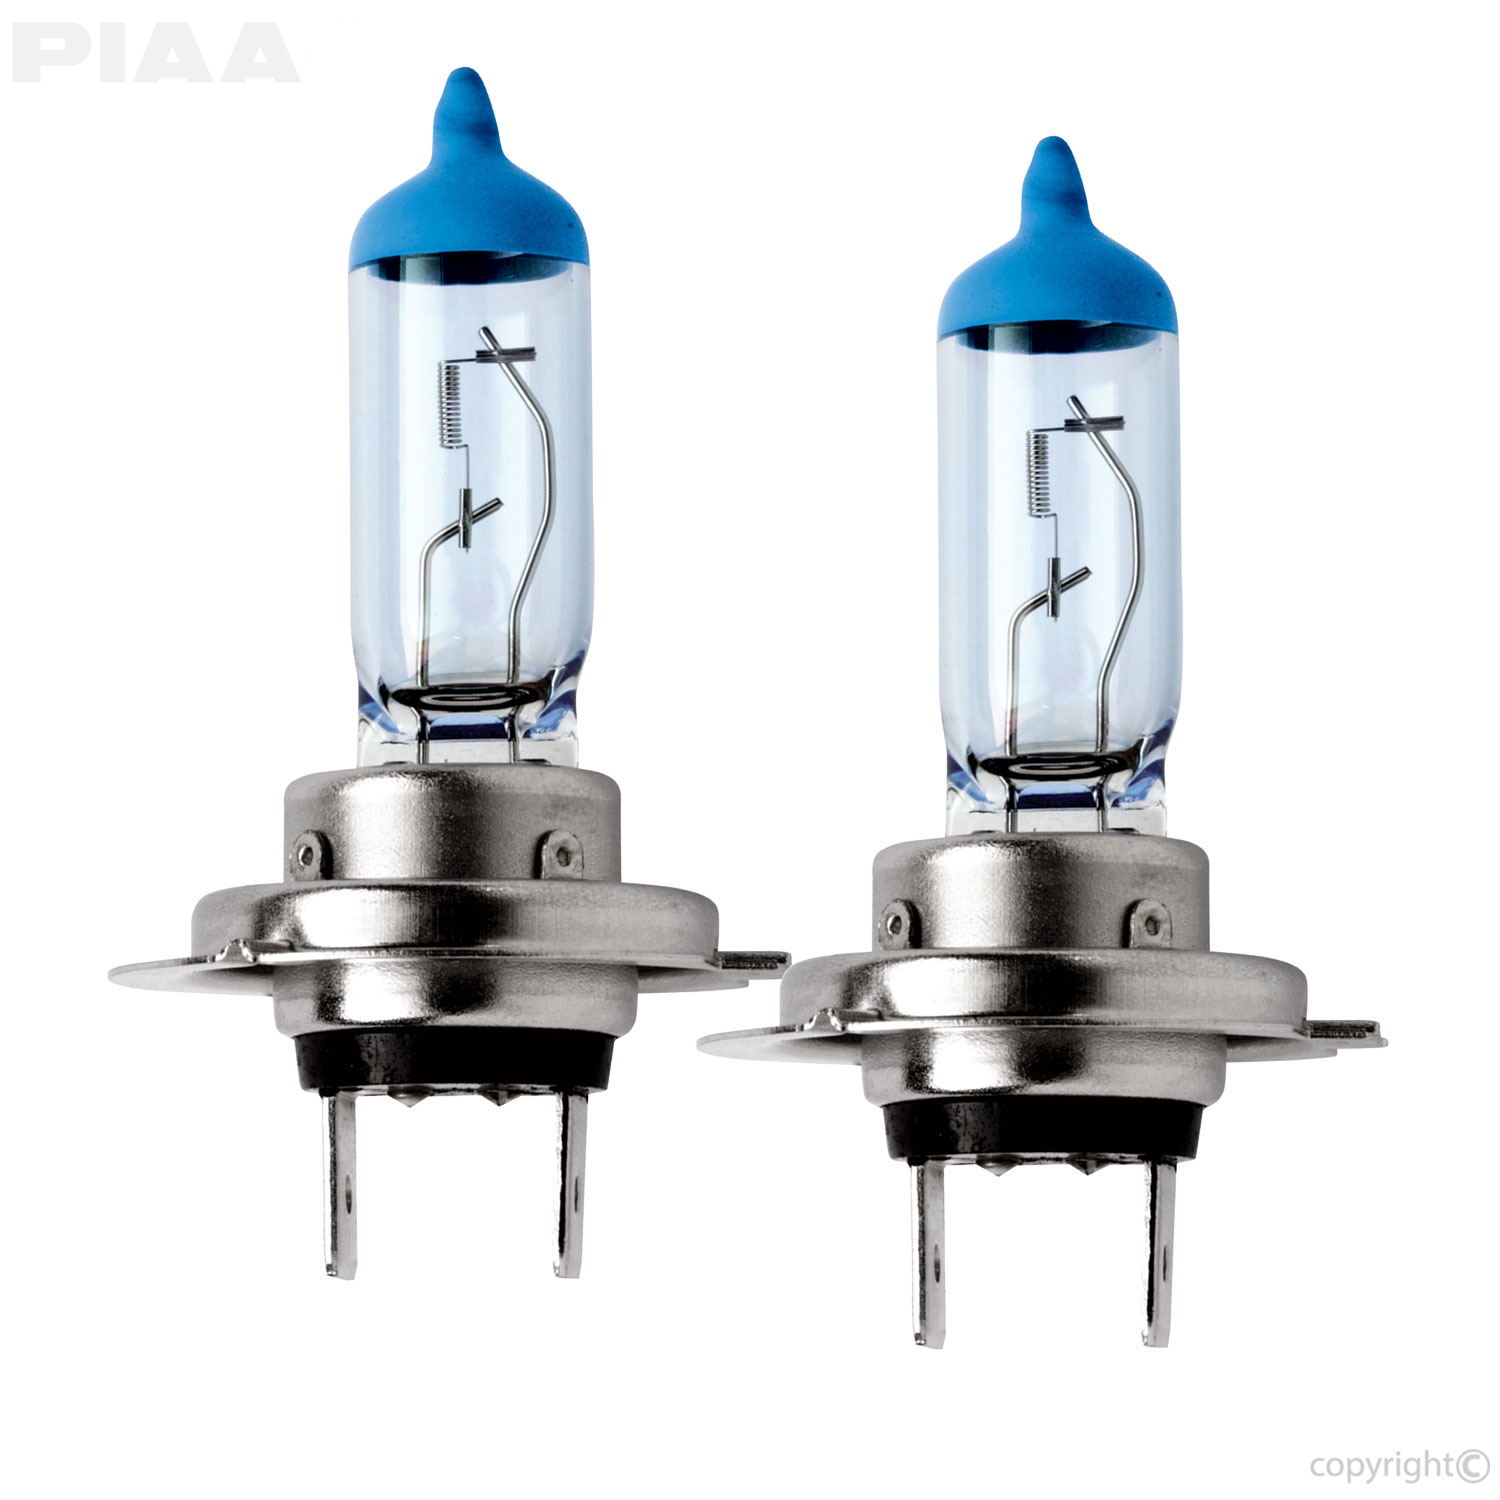 https://www.piaa.com/resize/Shared/product-images/automotive-bulbs/piaa-17655-h7-xtreme-dual-hr.jpg?bw=1000&w=1000&bh=1000&h=1000